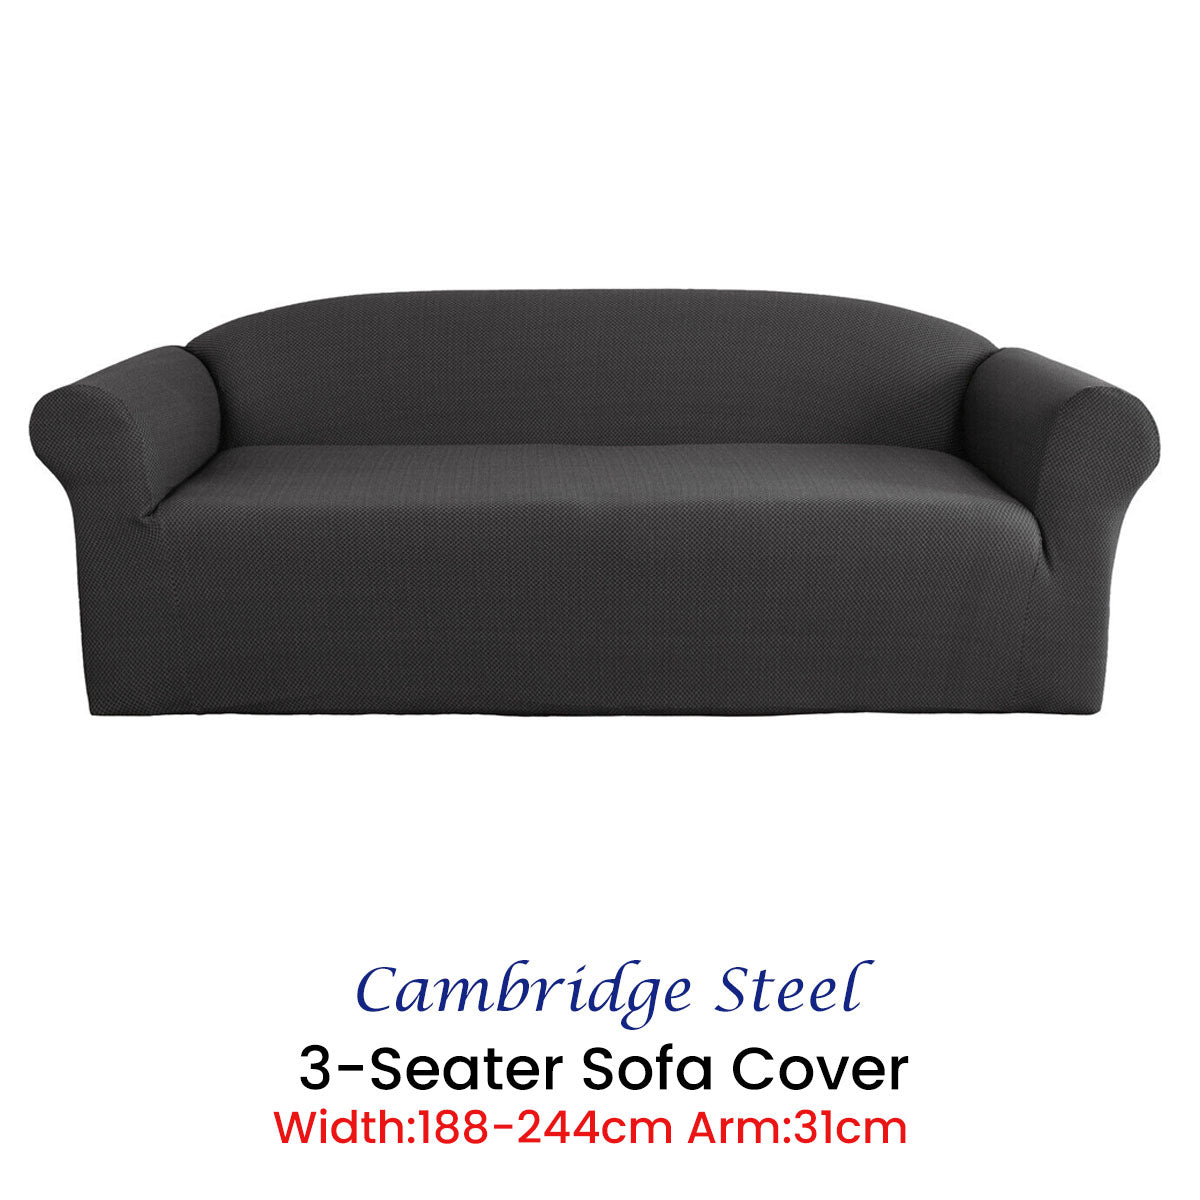 Cambridge Extra-stretch Couch Cover Steel Three Seater Steel